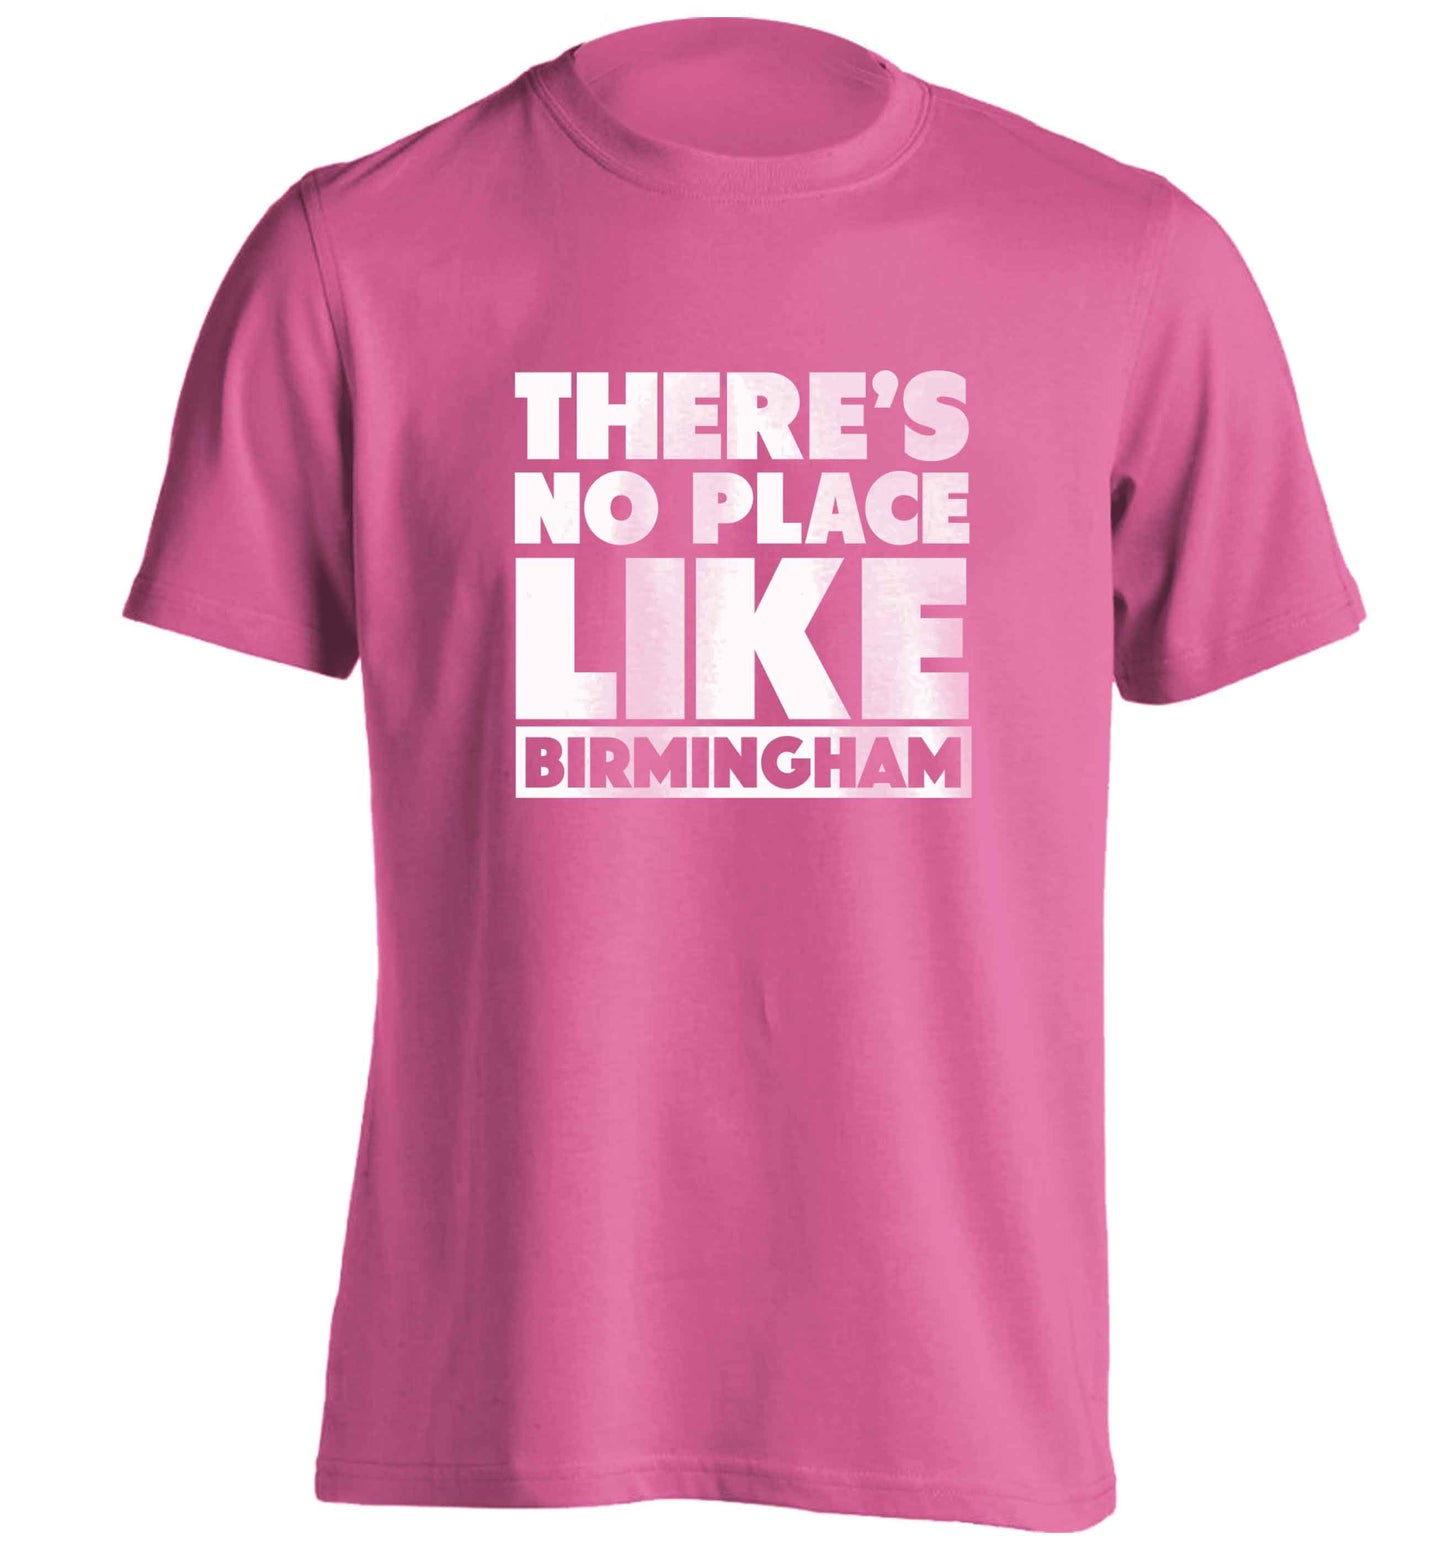 There's no place like Birmingham adults unisex pink Tshirt 2XL